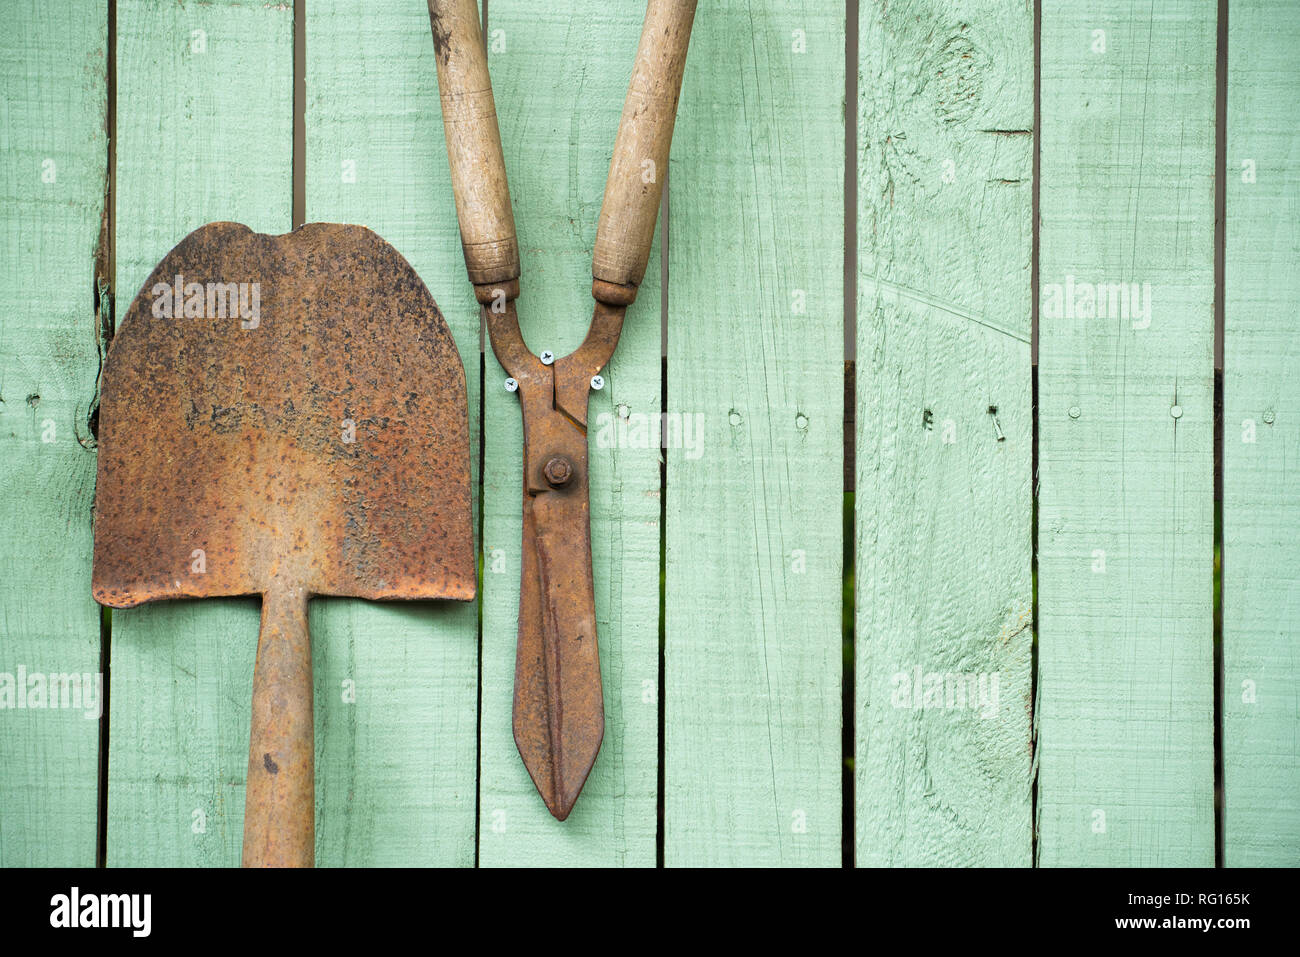 Old rusted gardening tools including a shovel and garden shears mounted on a timber garden fence painted green Stock Photo